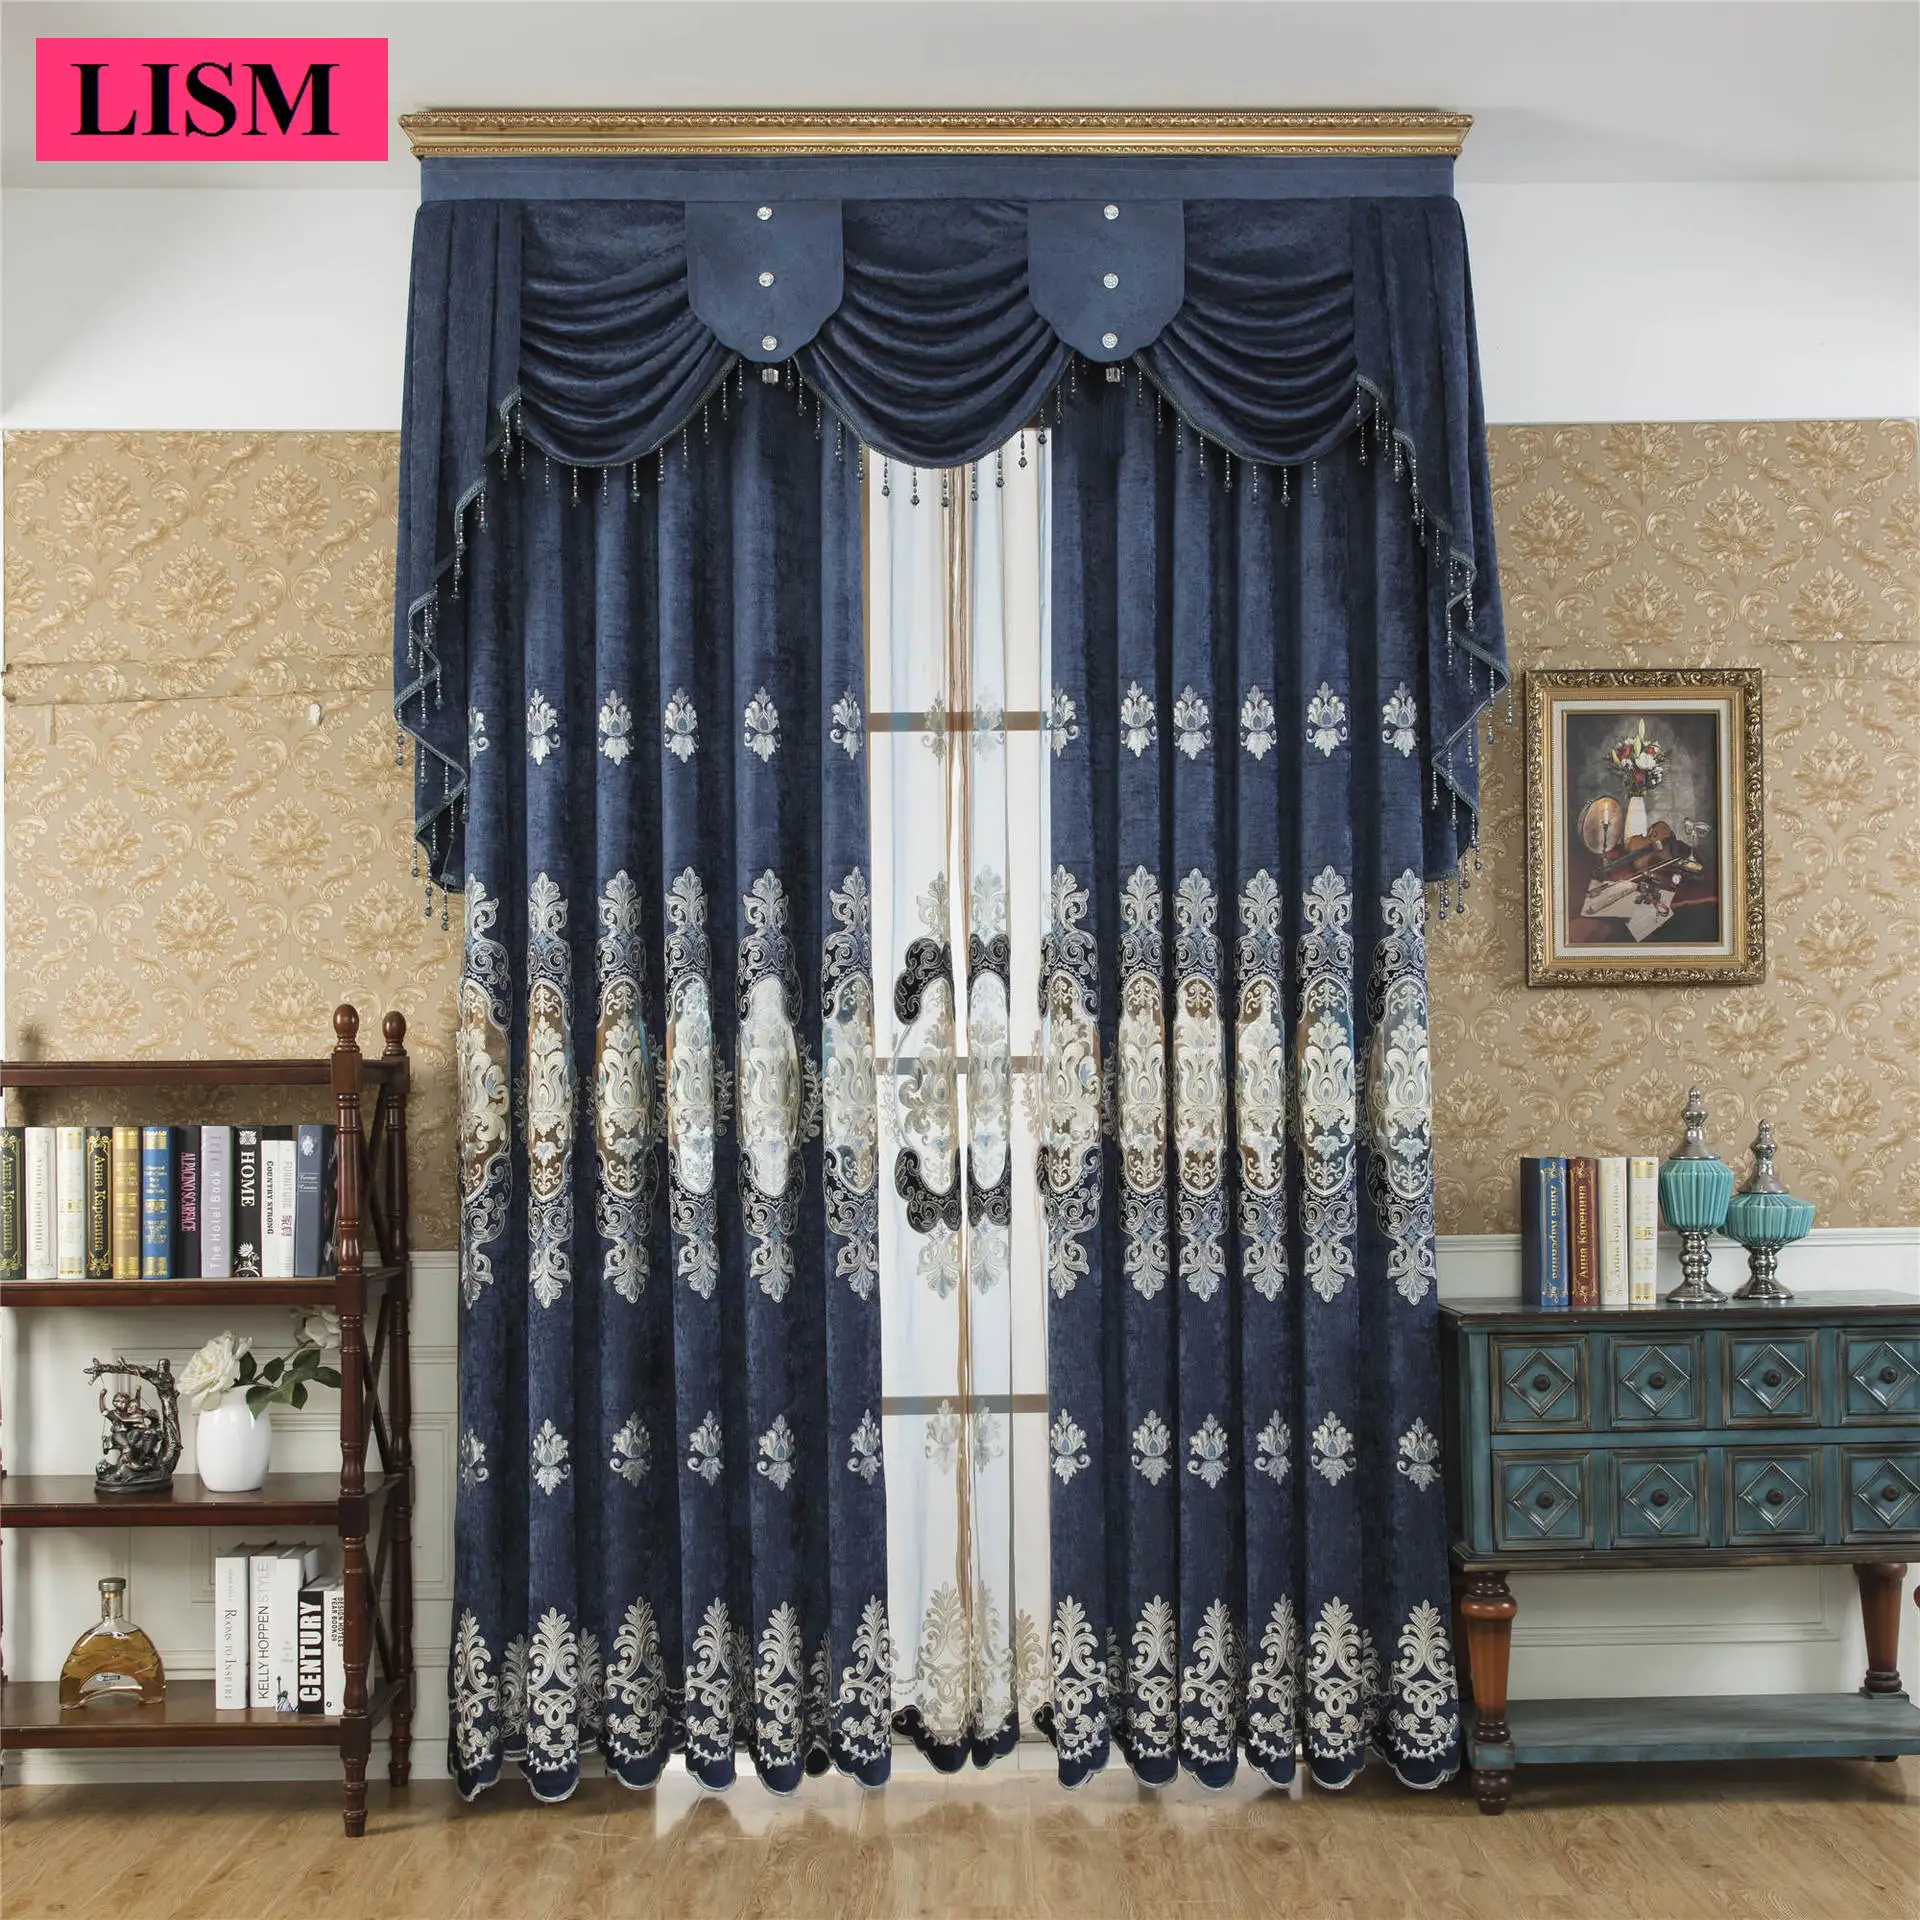 

Nordic Luxury Water-soluble Hollow Chenille Embroidered Curtains for Living Room Bedroom Study Blackout Custom Blue Lace Tulle